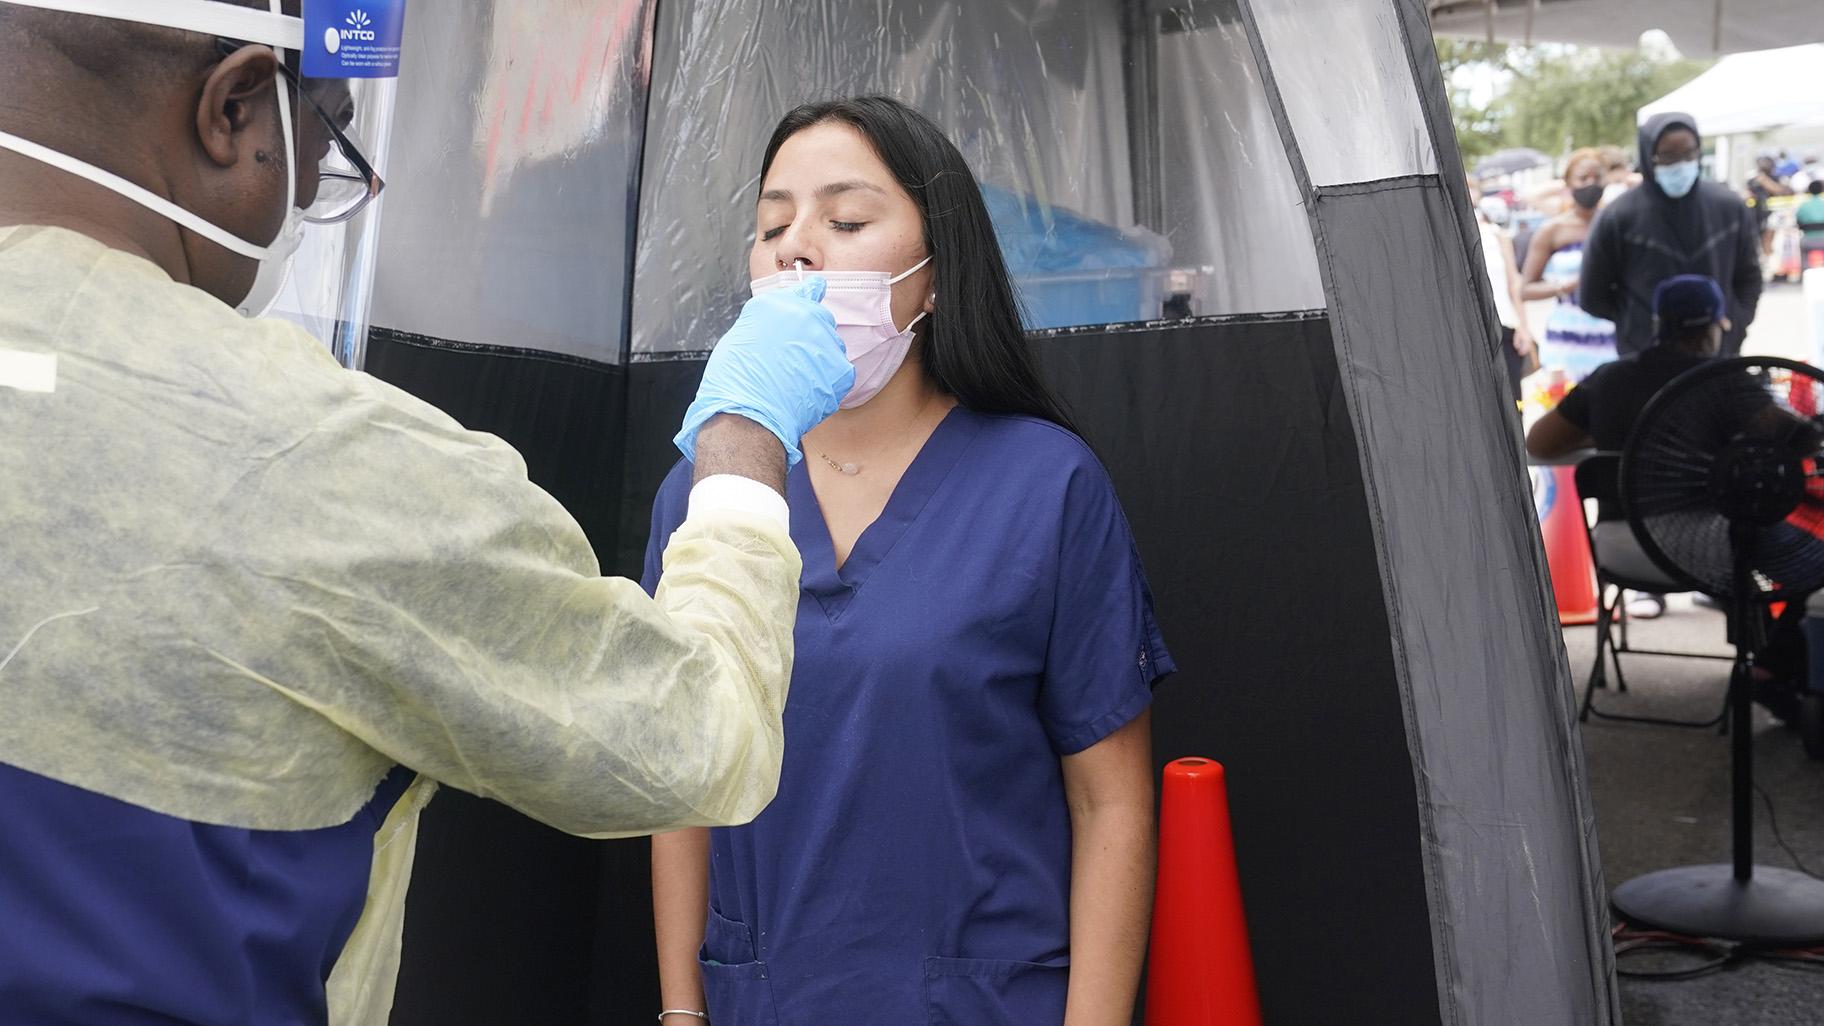 Janice Perez, a clinical technician, is tested for COVID-19, after a colleague at her office recently tested positive, Monday, Aug. 9, 2021, in North Miami.  (AP Photo / Marta Lavandier)